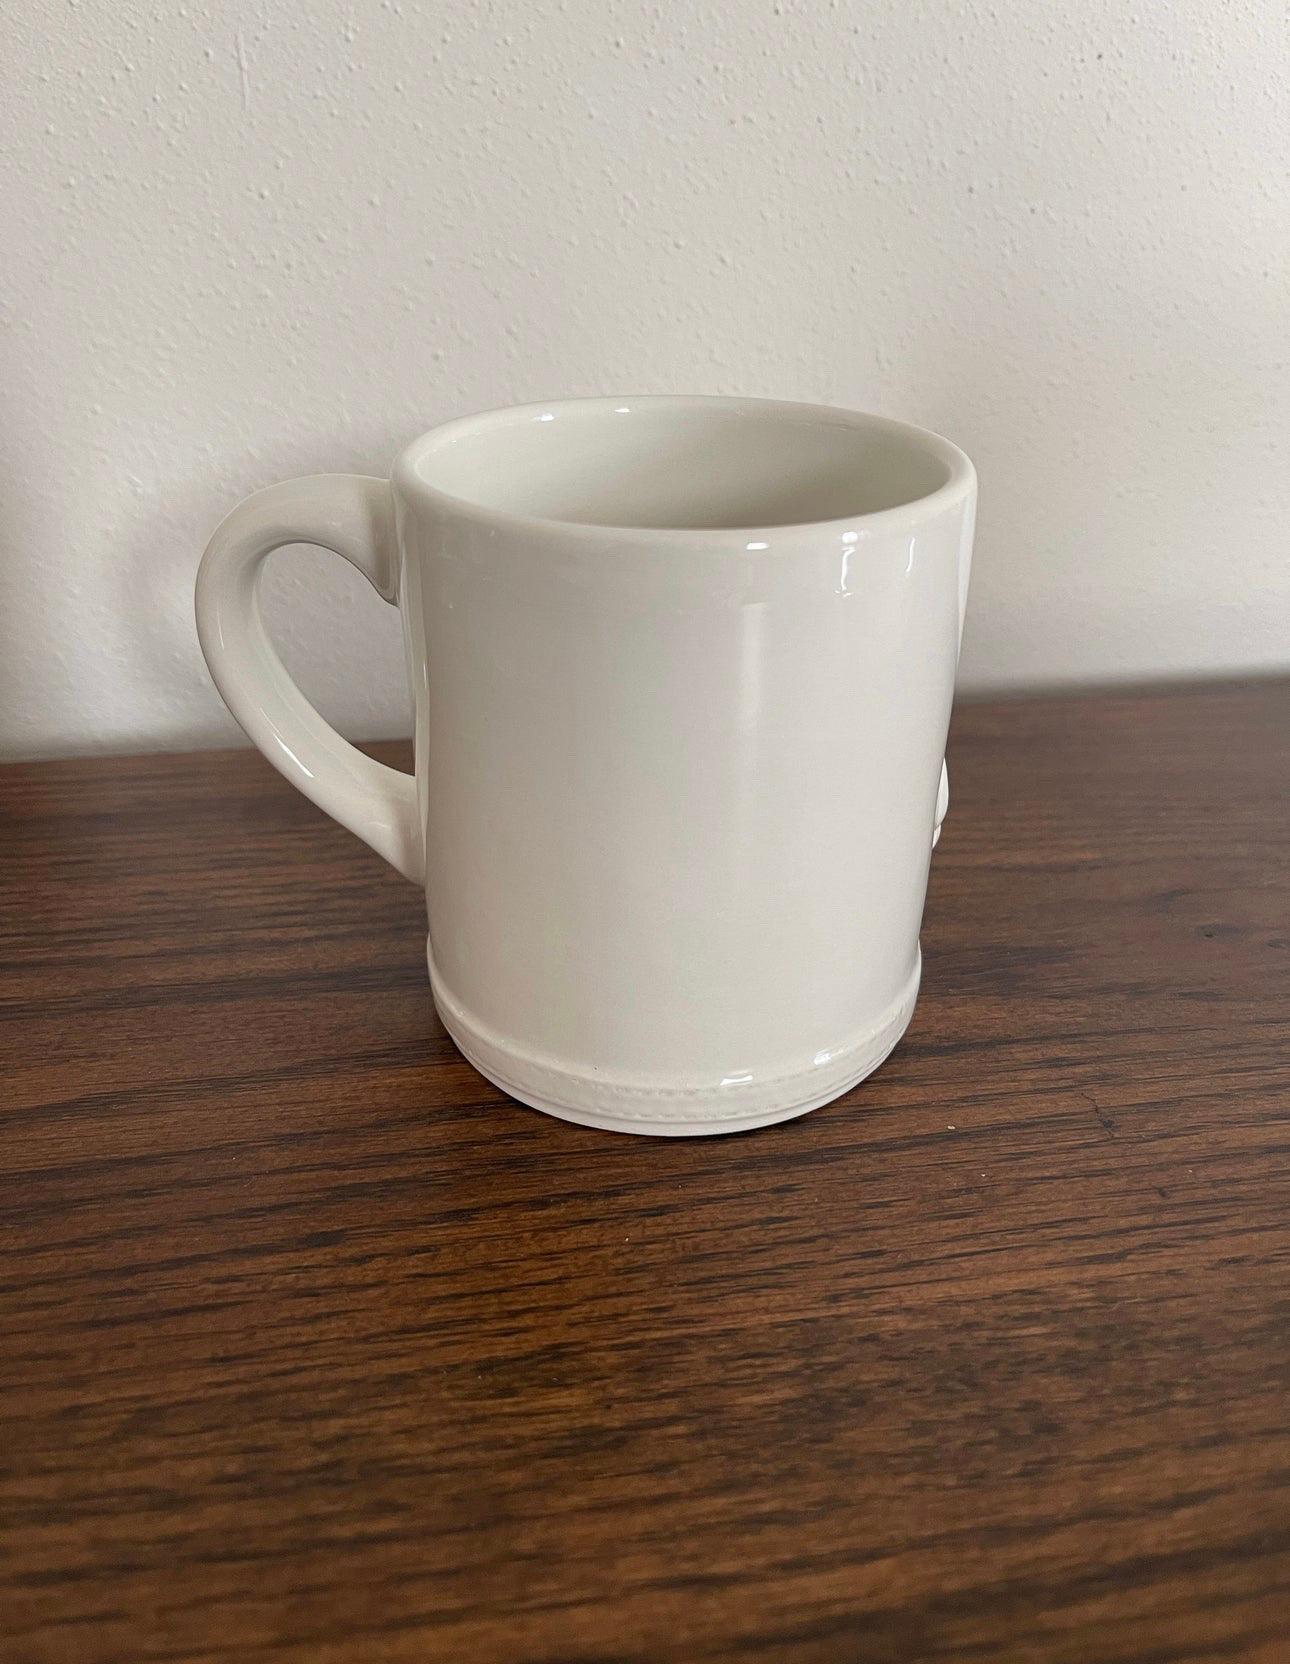 🖤Super RARE Vintage Gucci Mug🖤

EXCELLENT CONDITION!

Sometimes we all need something beautiful to start the day. Very Chic and cool collectors piece that is a total conversation starter!

Iconic Gucci equestrian motif and double horse heads